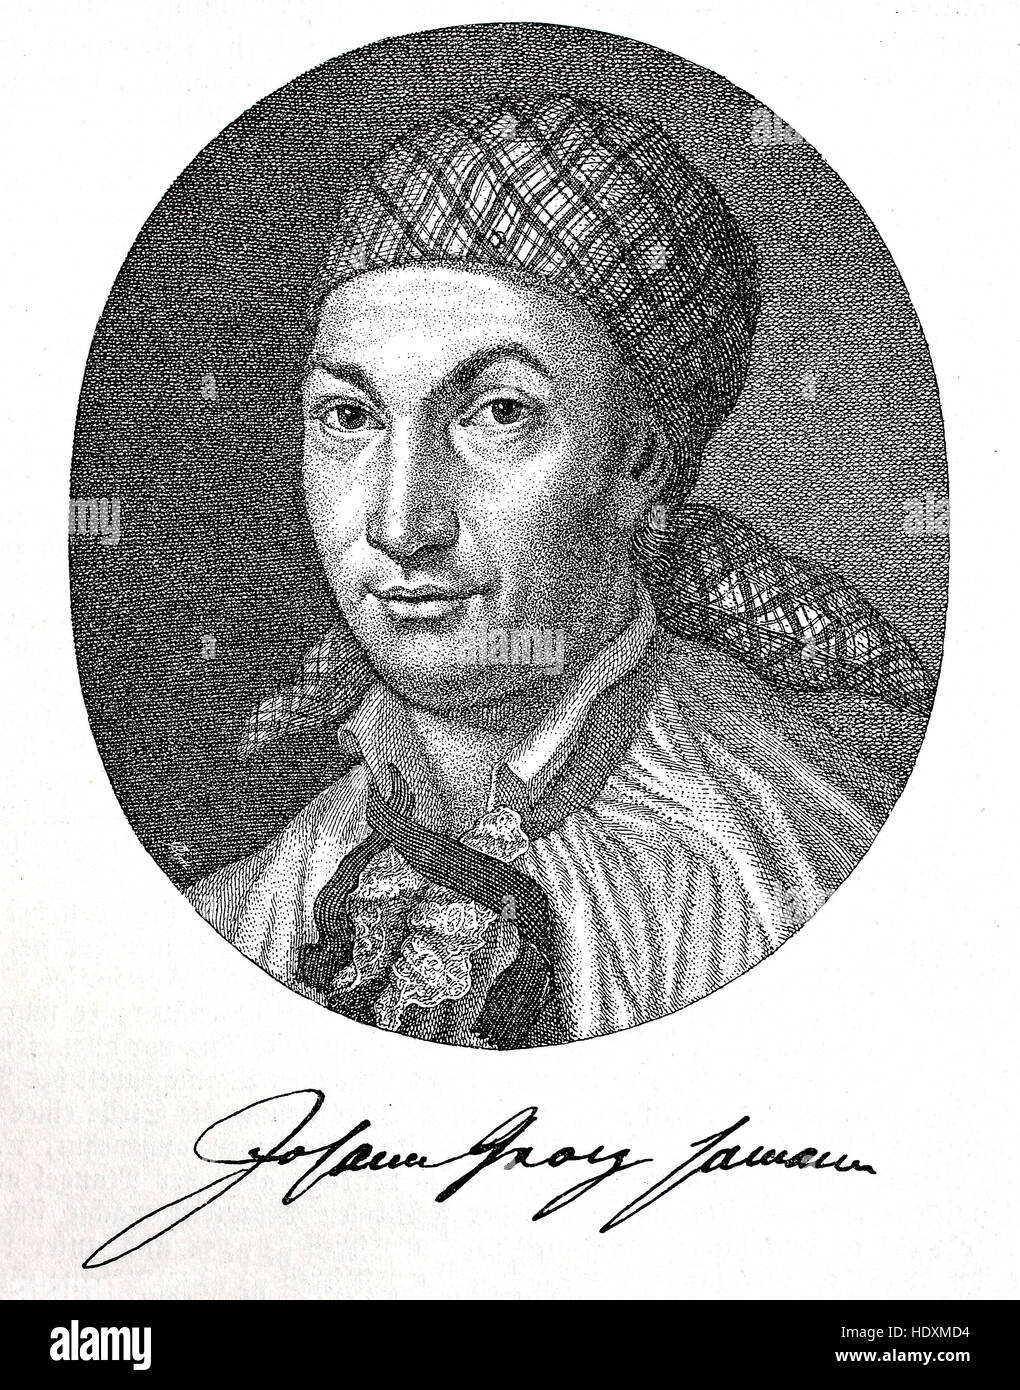 Johann Georg Hamann, 1730-788, a German philosopher and writer, woodcut from the year 1882, digital improved Stock Photo